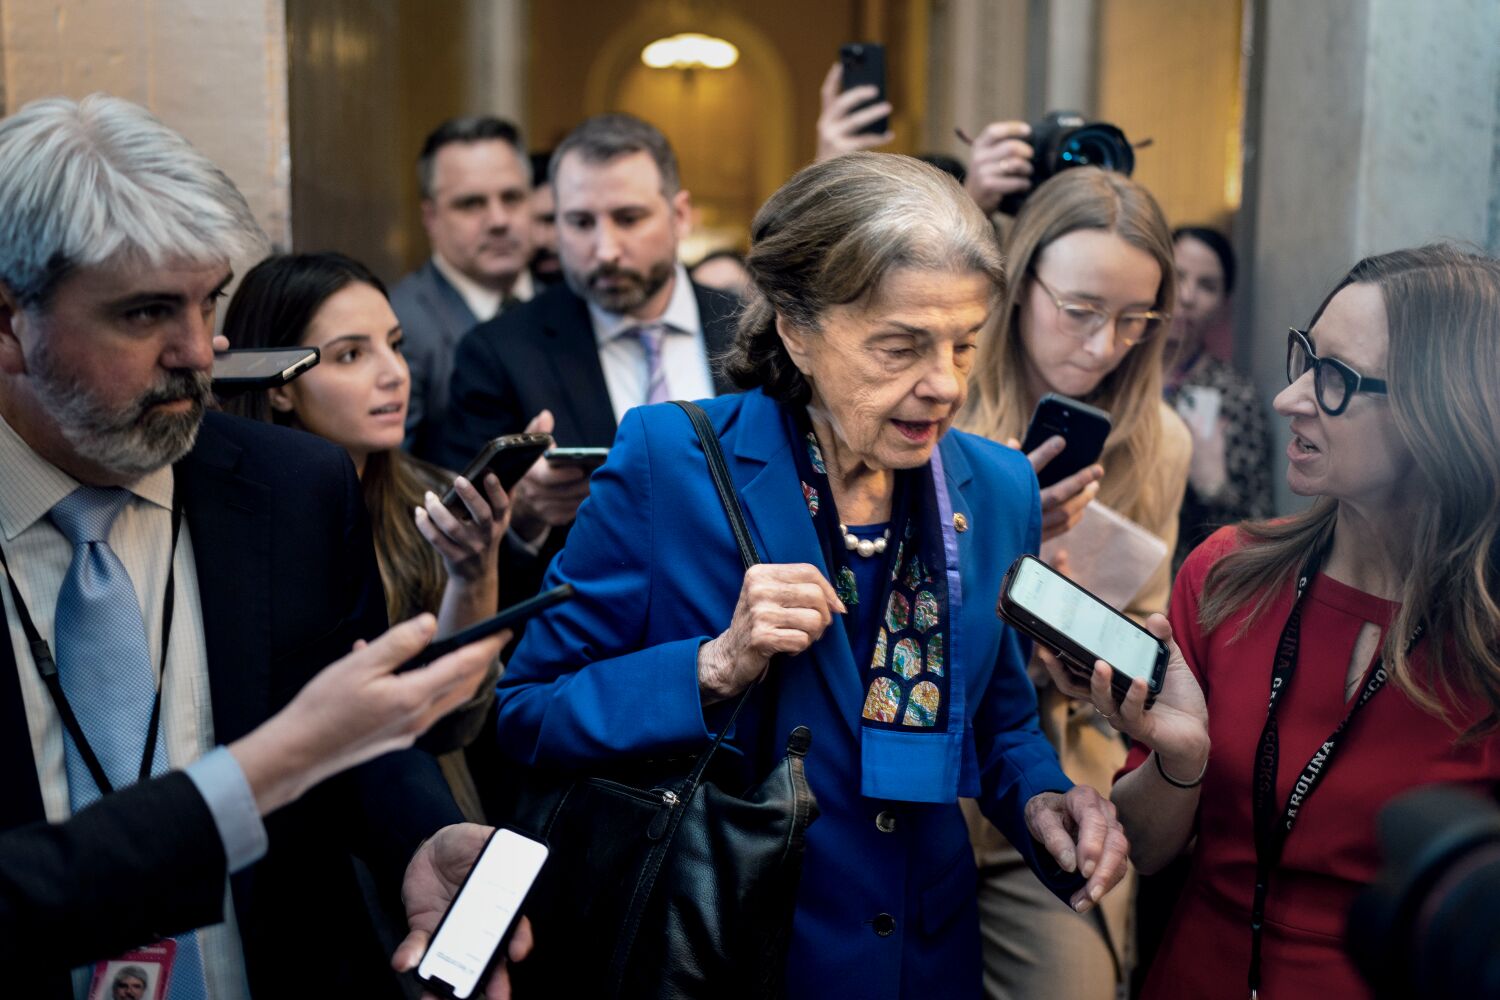 Feinstein’s continued Senate absence leads to a call